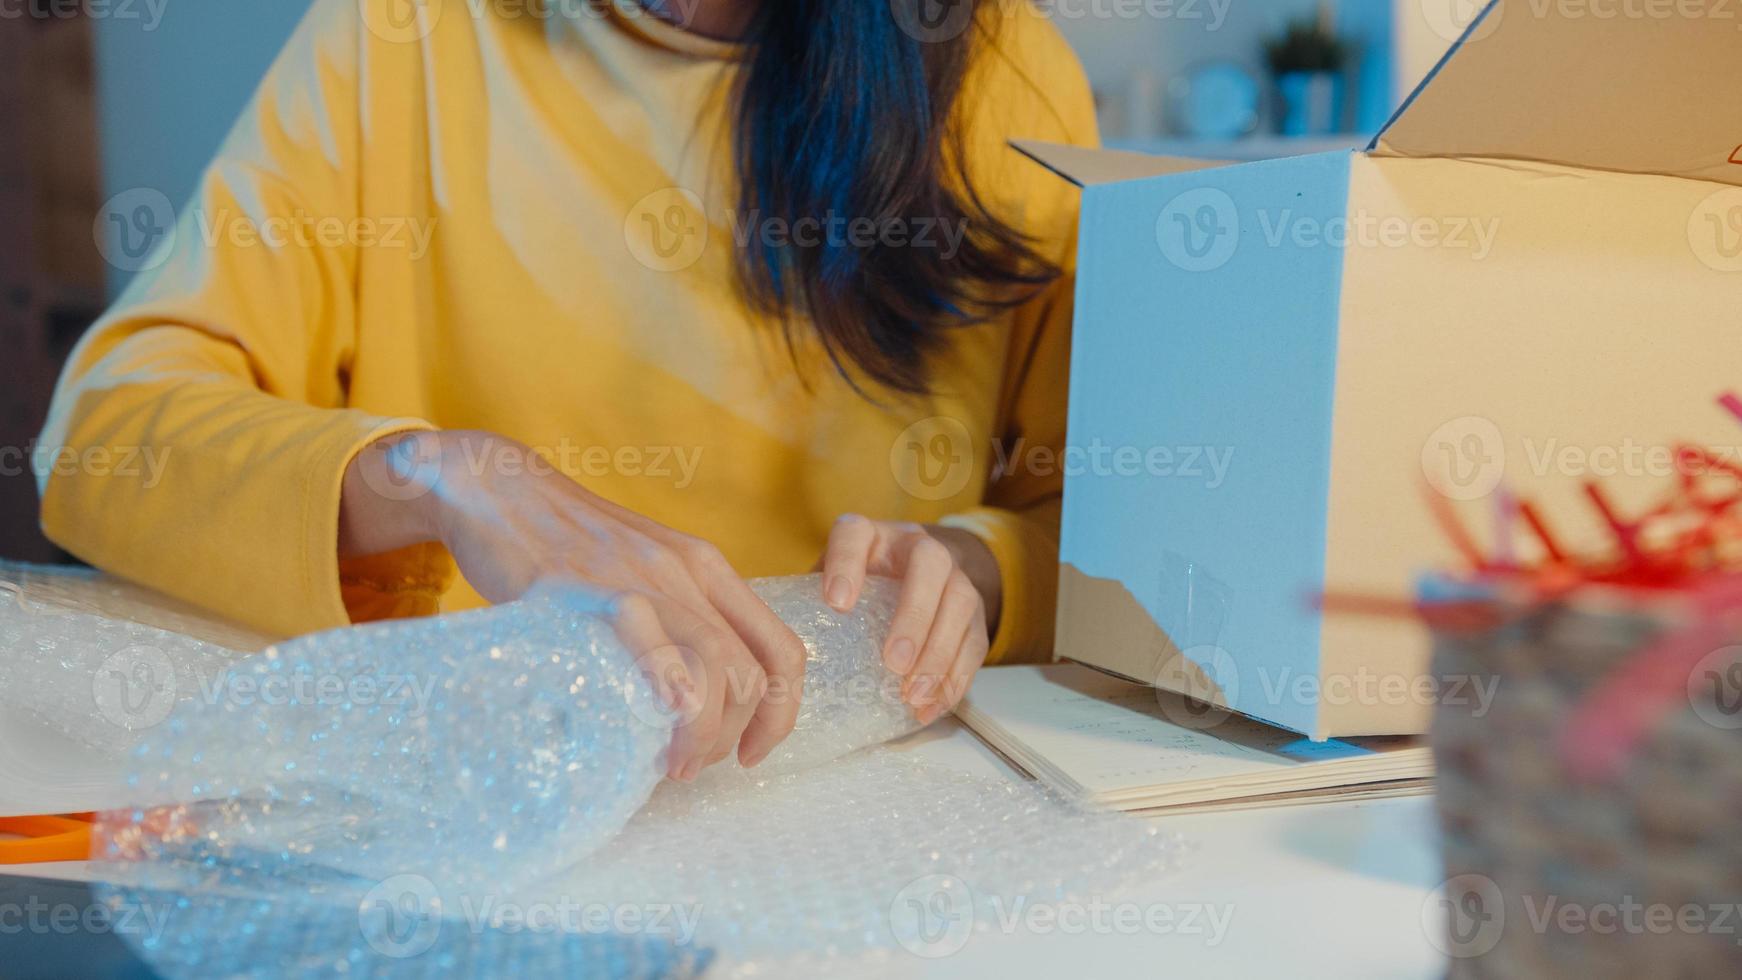 Young Asia businesswoman packing glass use bubble wrap for packing support damage fragile product in home office at night. Small business owner, online market delivery, lifestyle freelance concept. photo